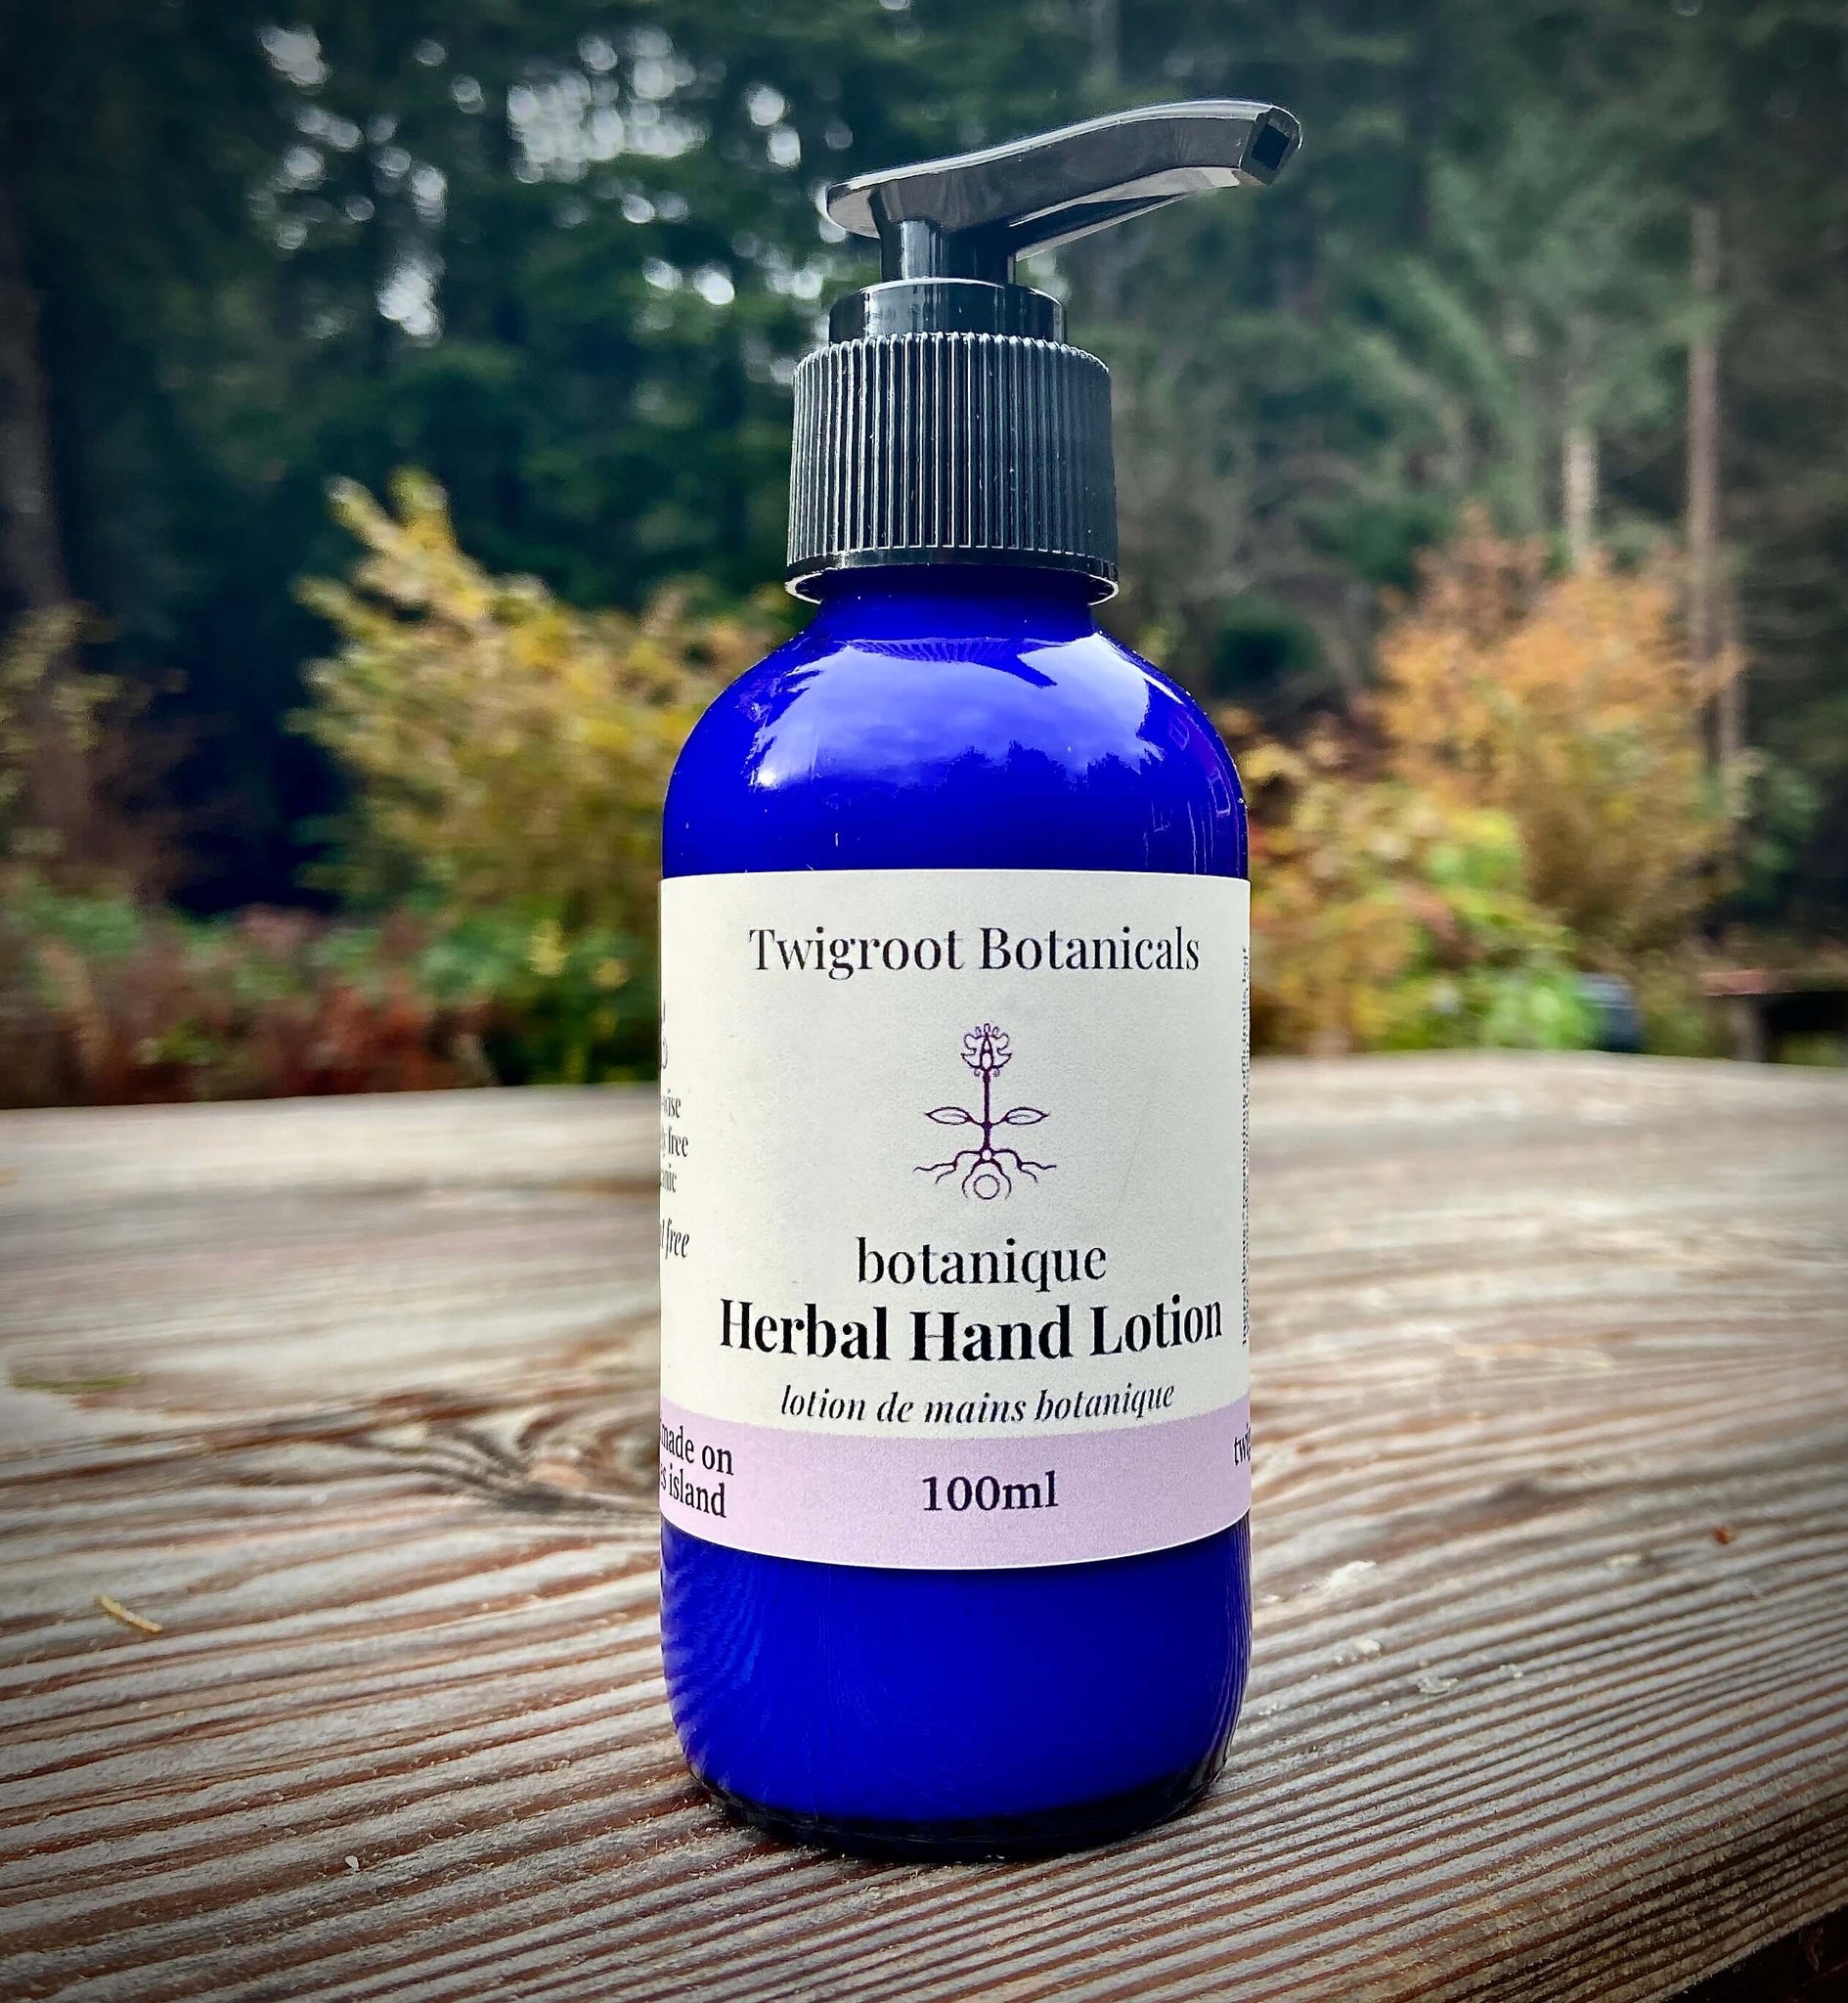 Botanique-Herbal Hand Lotion